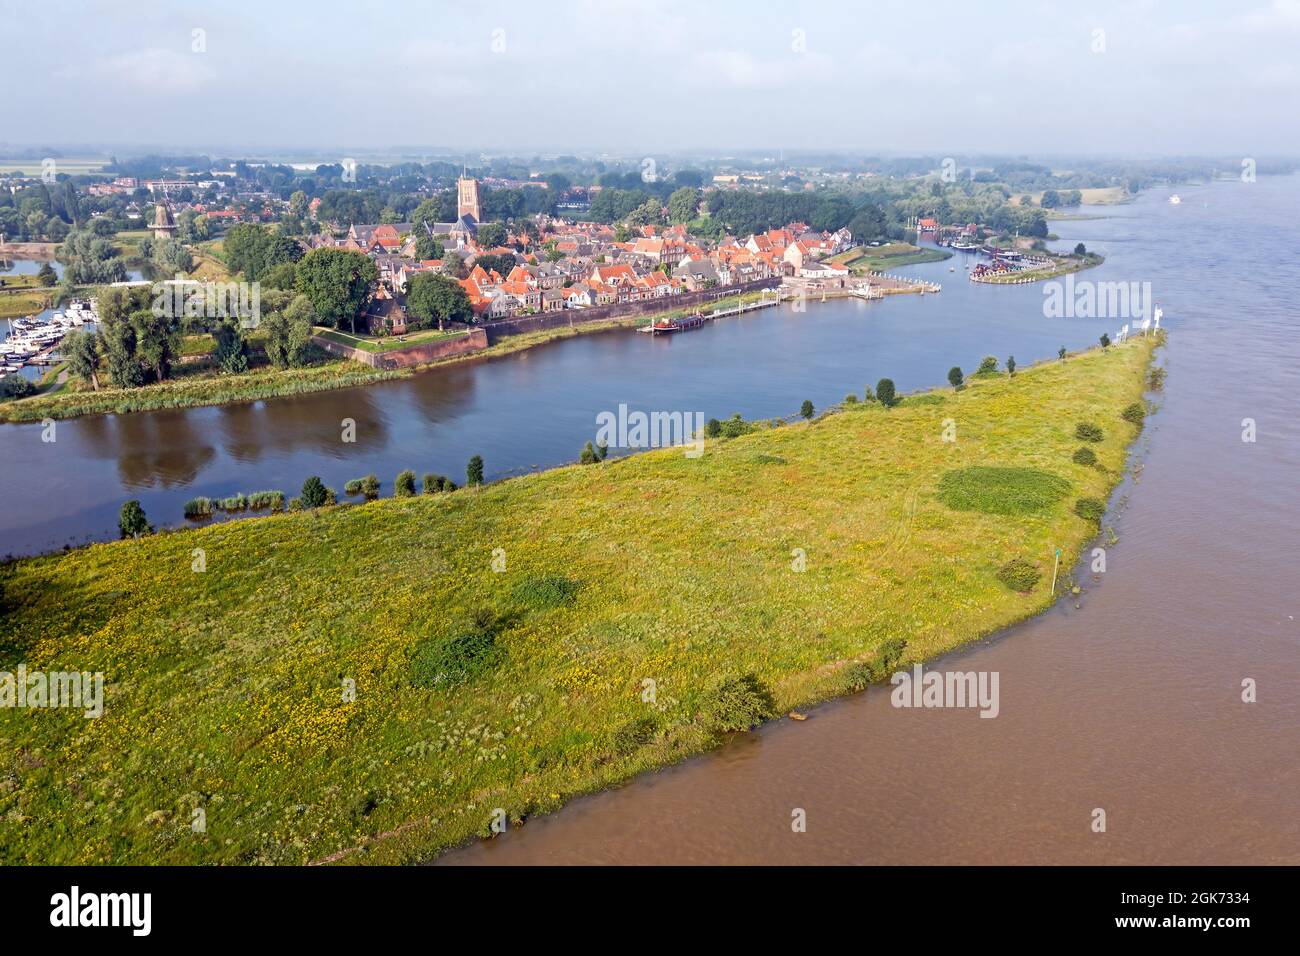 Aerial from the city Woudrichem at the river Merwede in the Netherlands in a flooded landscape Stock Photo